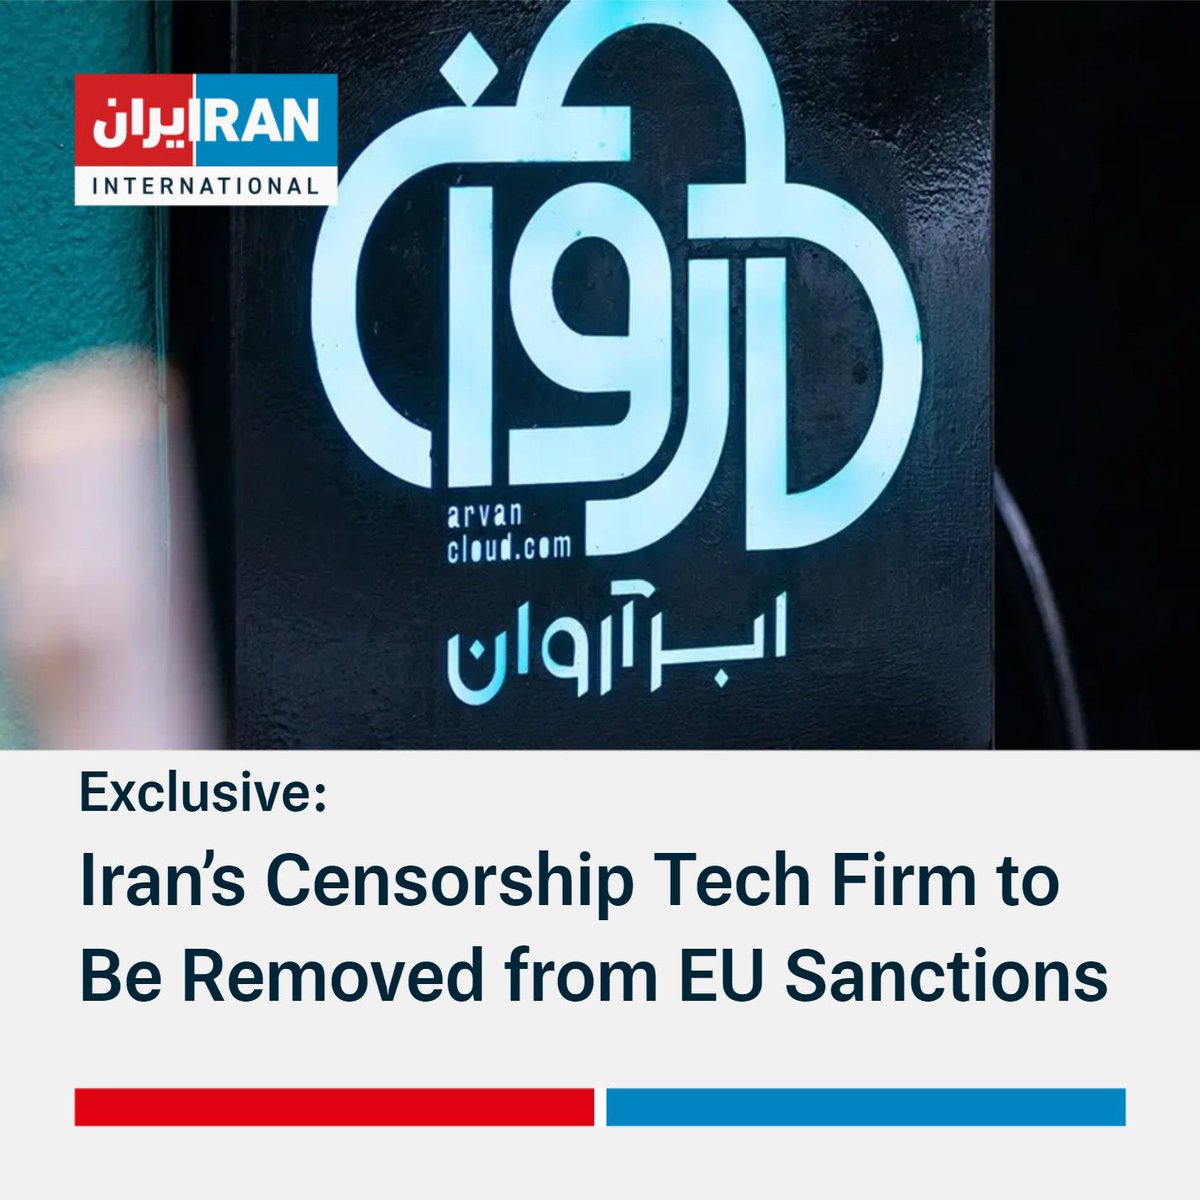 Reports indicate that the EU is set to lift sanctions imposed on ArvanCloud, an Iran-based technology firm, following a successful lobbying effort supported by Iran’s regime. Despite both the U.S. and EU sanctioning ArvanCloud for its role in internet censorship, the decision by